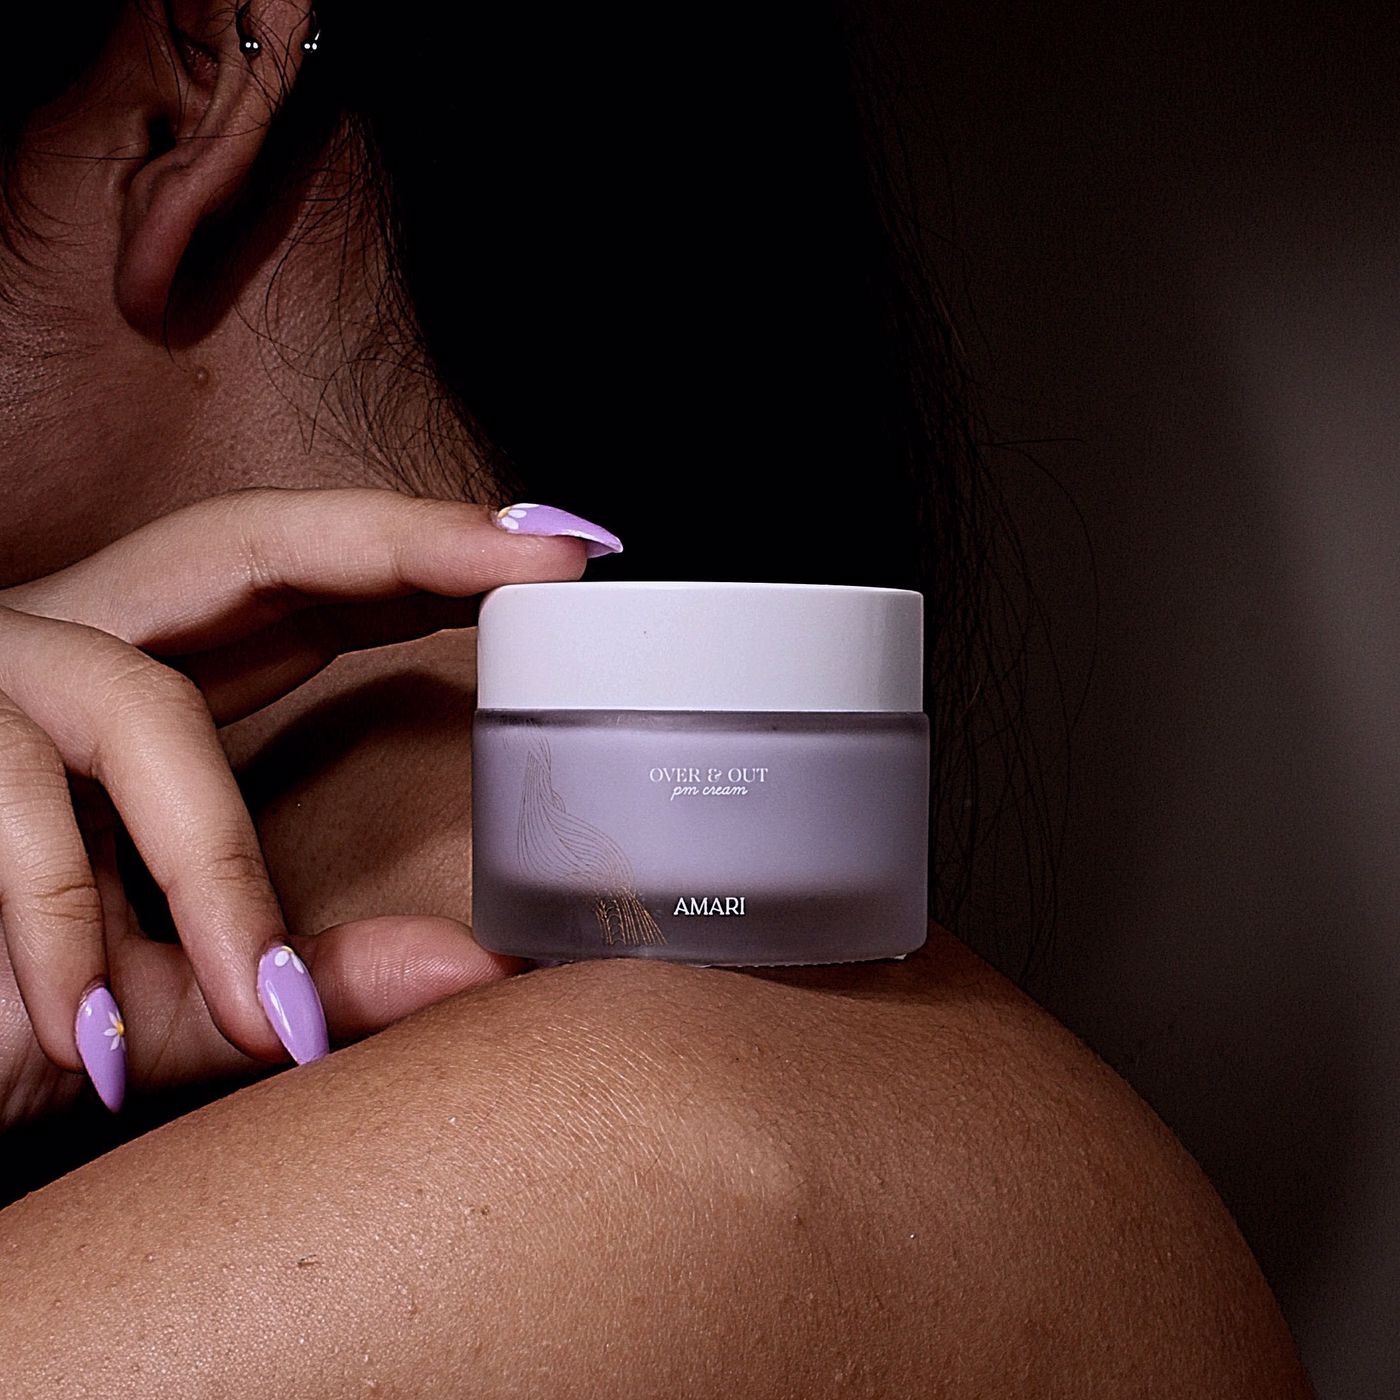 Over & Out Night Cream